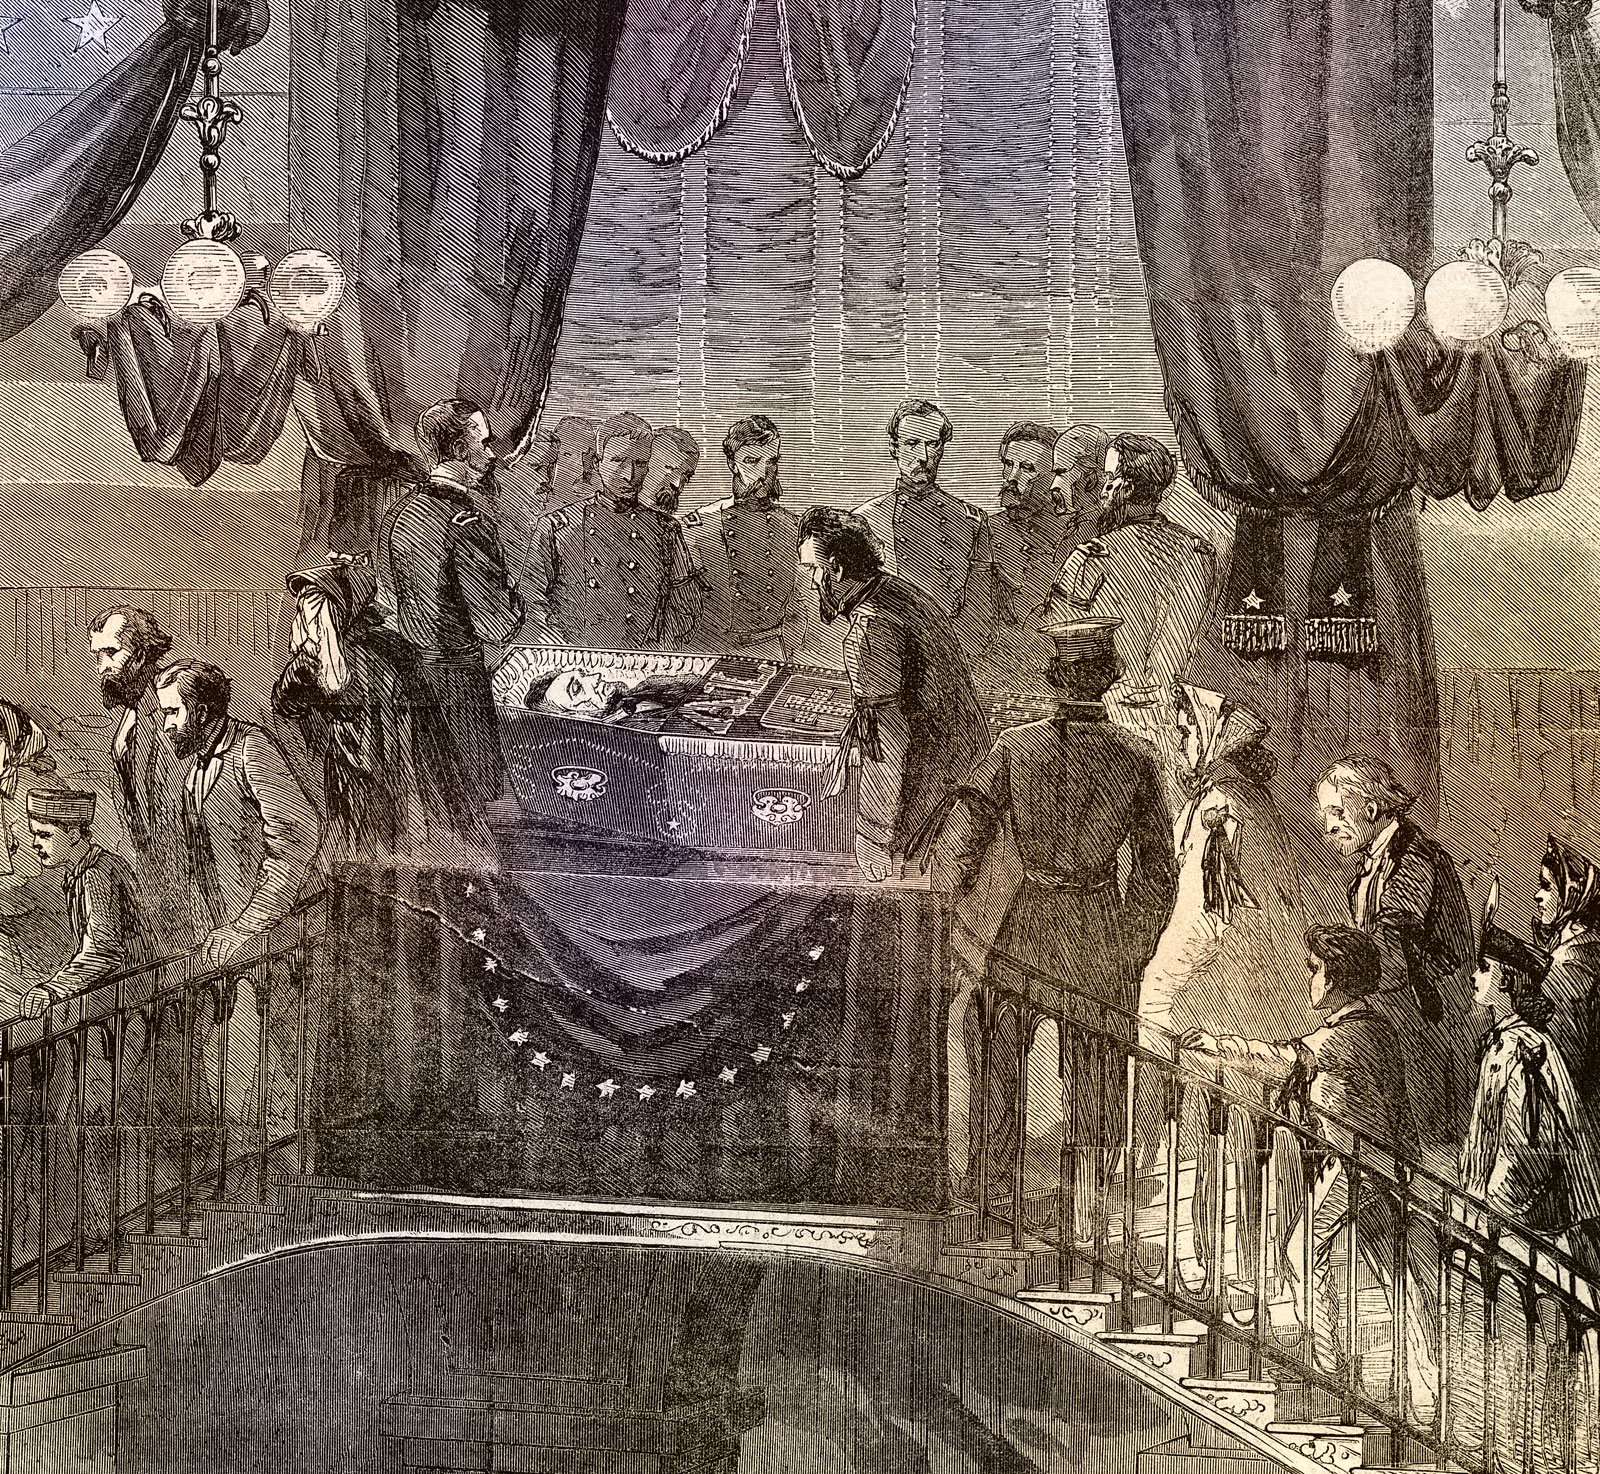 An artist's impression of President Abraham Lincoln lying in state at New York City Hall on April 24-25, 1865. The illustration depicts a somber scene with a draped casket surrounded by mourning officials and guards in uniform. A group of civilians, some with bowed heads, are paying their respects.